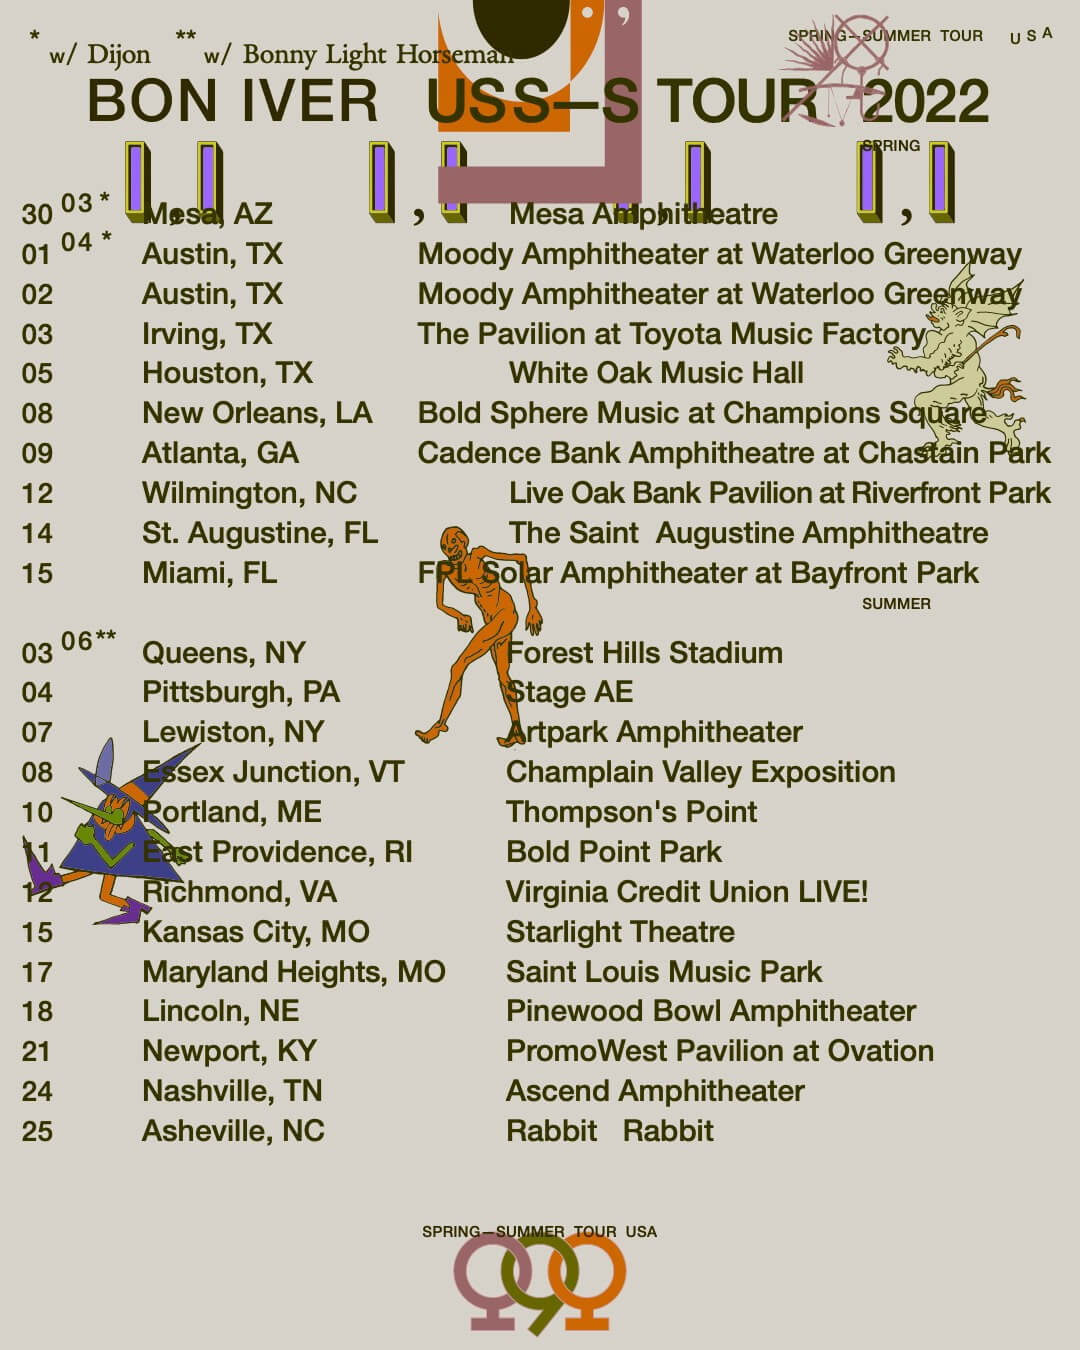 Bon Iver have announced a 23-date US tour. Beginning on March, 30th, 2022 in Mesa, Arizona. The band will also play a series of amphitheater